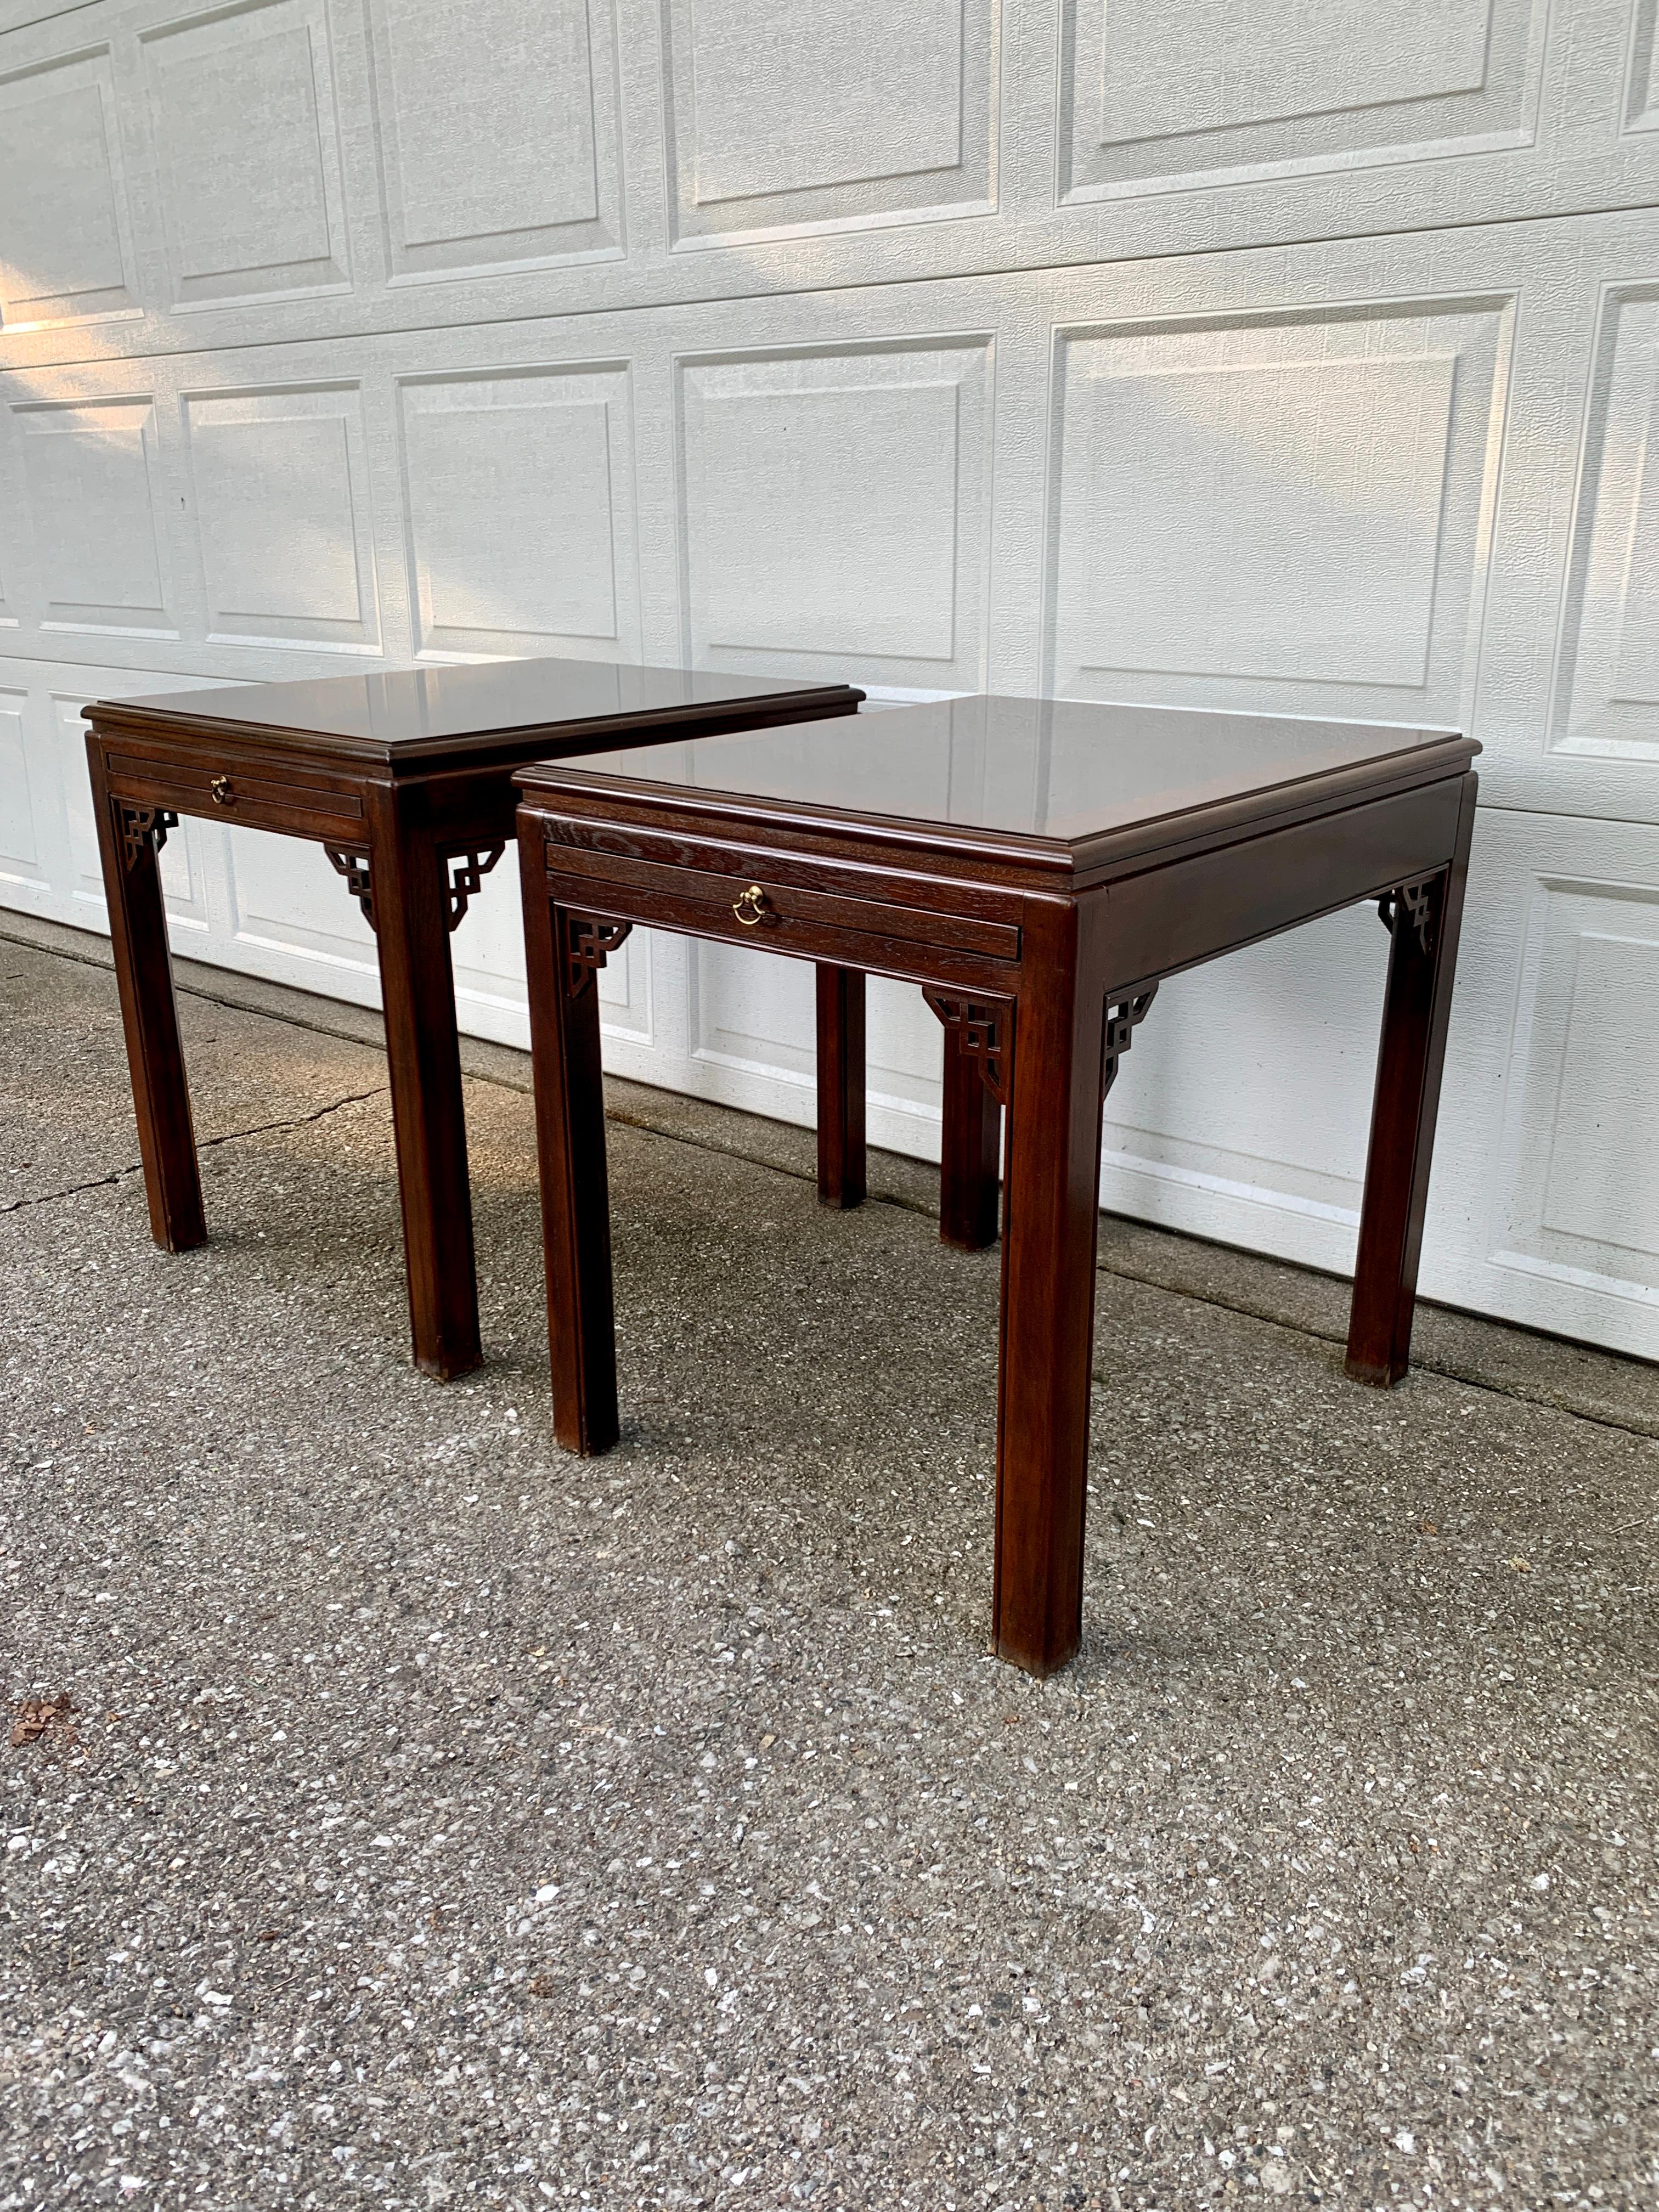 Drexel Heritage English Chippendale Banded Mahogany Side Tables, Pair In Good Condition For Sale In Elkhart, IN